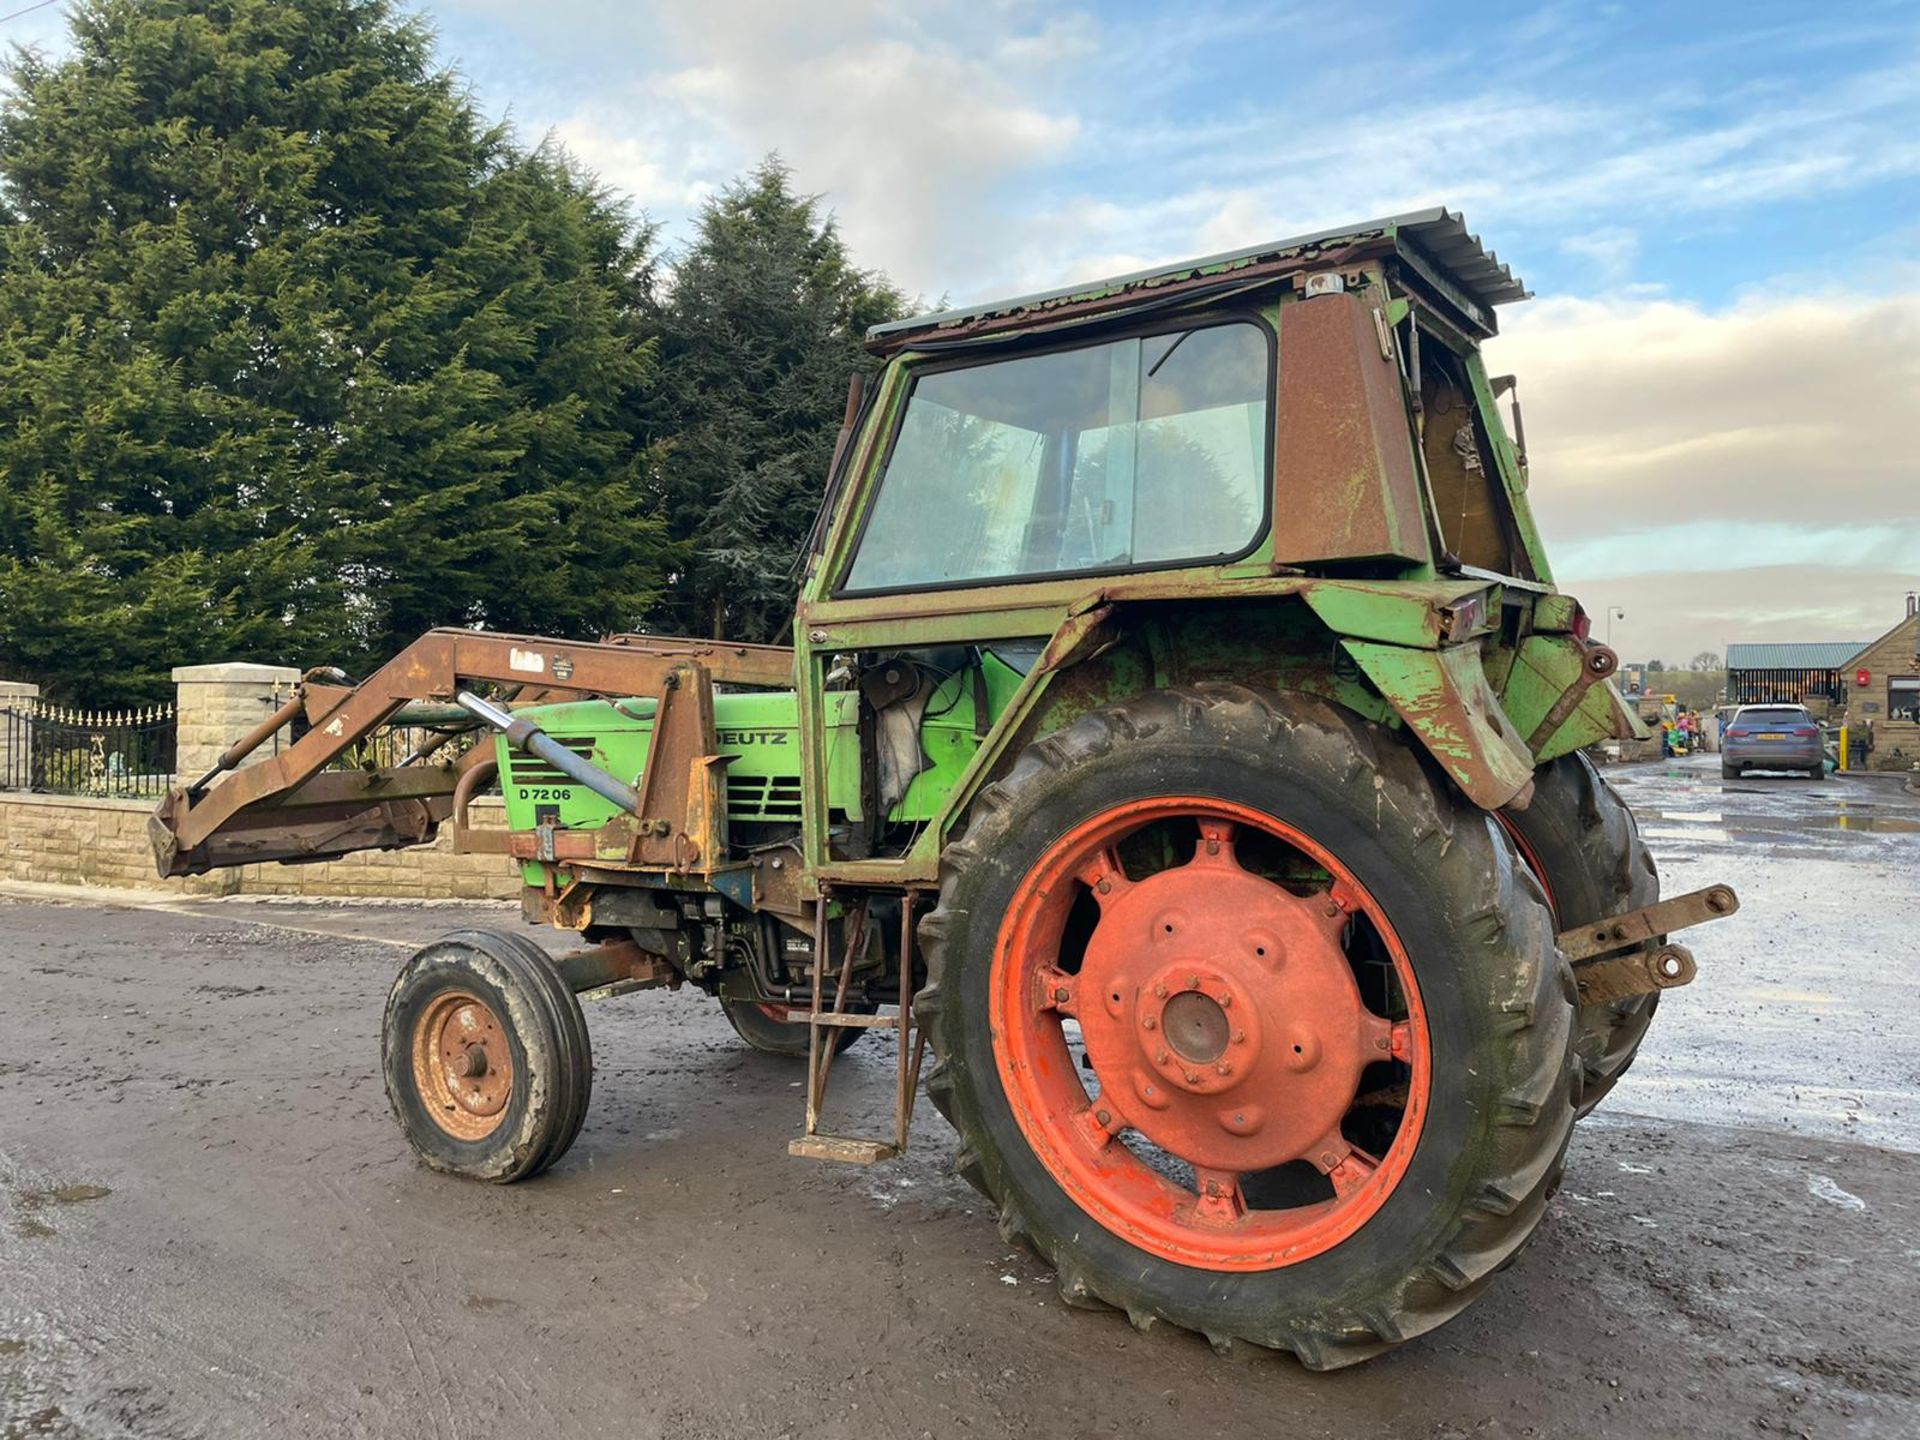 DEUTZ D7206 LOADER TRACTOR, RUNS, WORKS AND LIFTS, 3 POINT LINKAGE, PICK UP HITCH *NO VAT* - Image 3 of 5